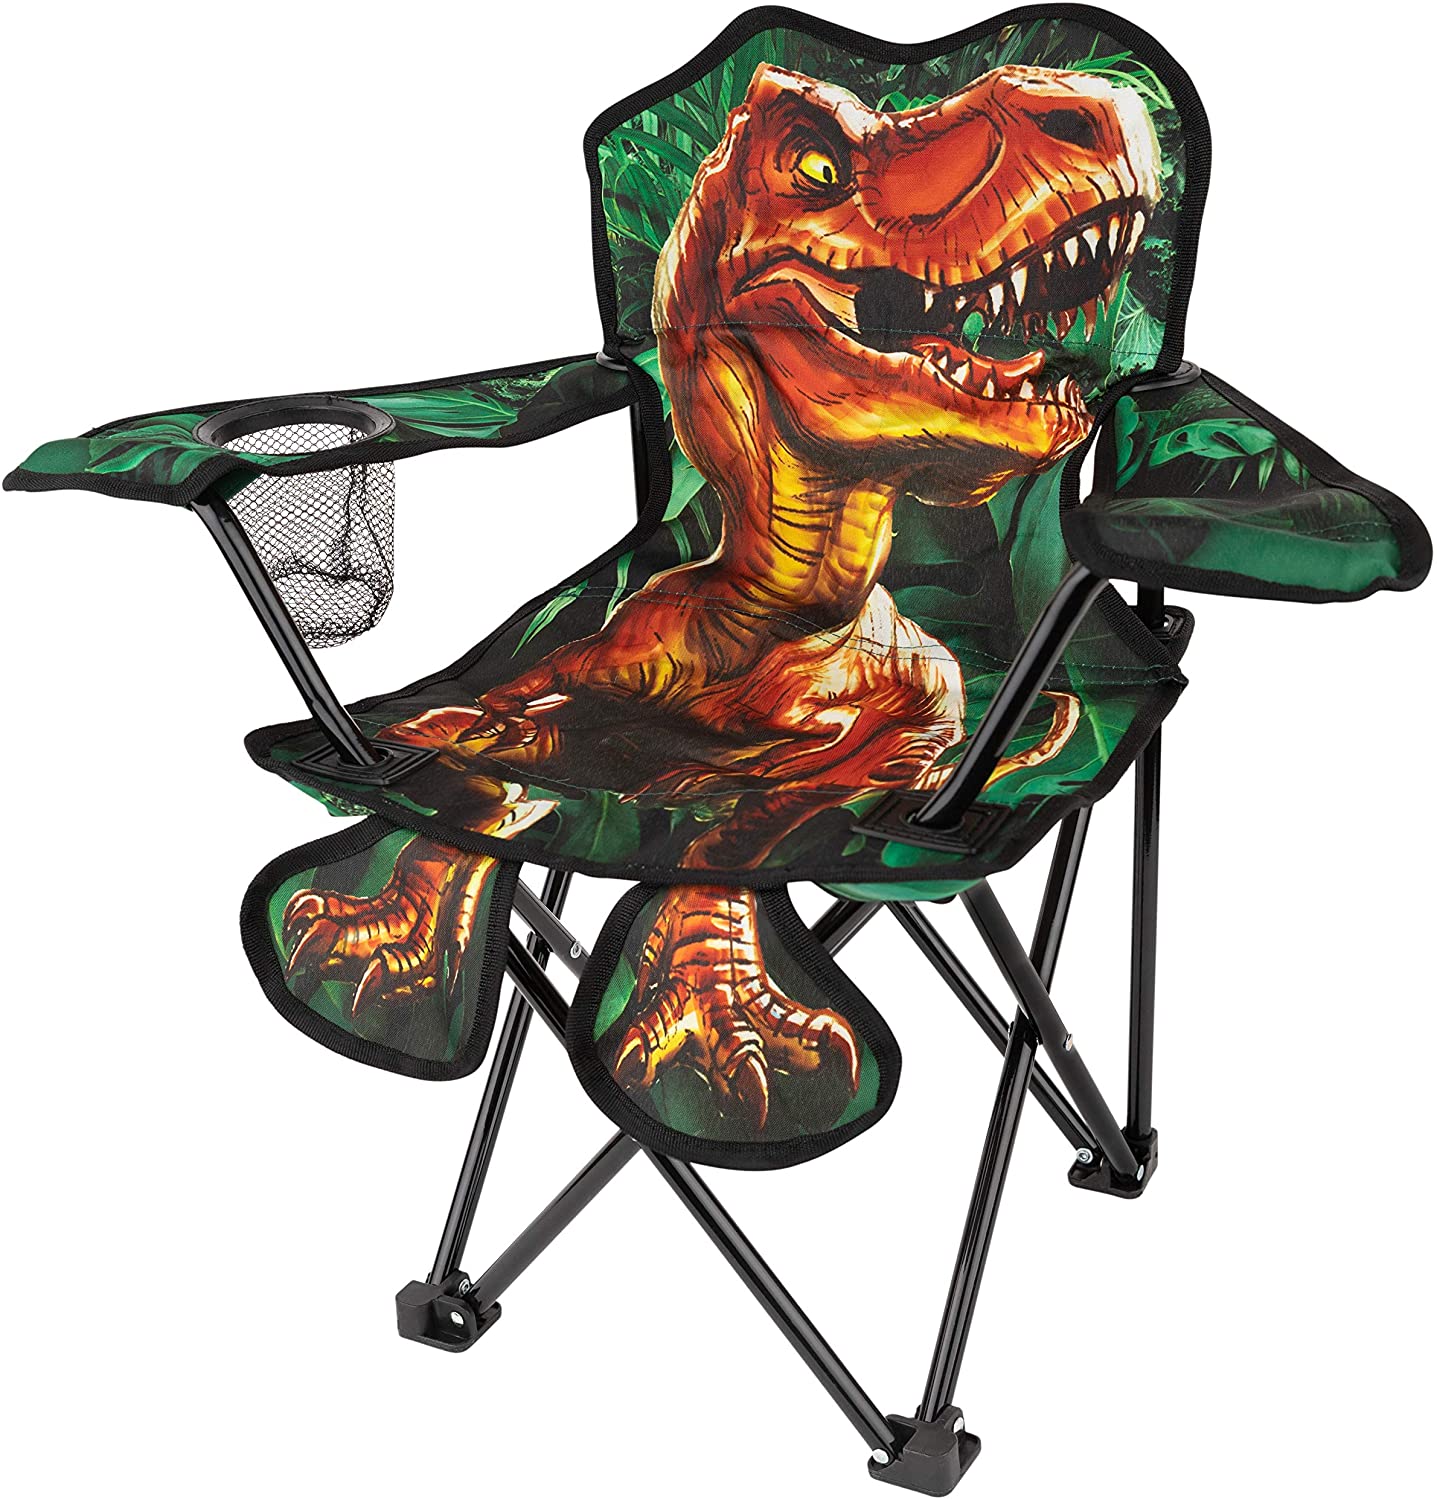 Toy To Enjoy Outdoor Dinosaur Chair for Kids – Foldable Children’s Chair for Camping, Tailgates, Beach, – Carrying Bag Included Mesh Cup Holder & Sturdy Construction. Available for Ages 2 to 5 & 5-10